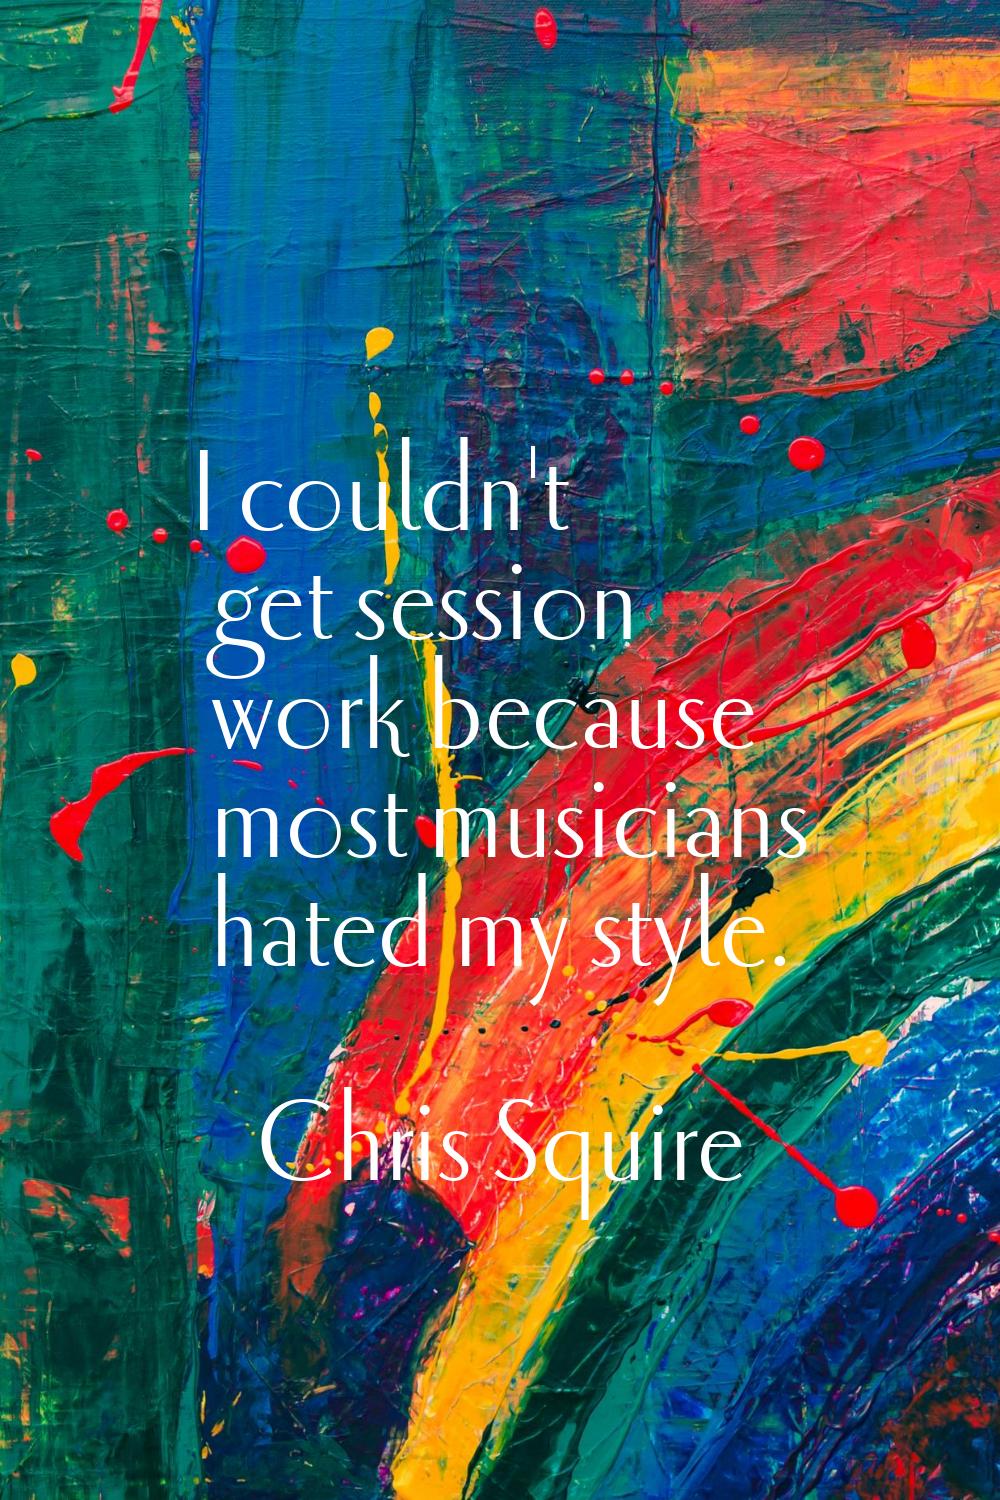 I couldn't get session work because most musicians hated my style.